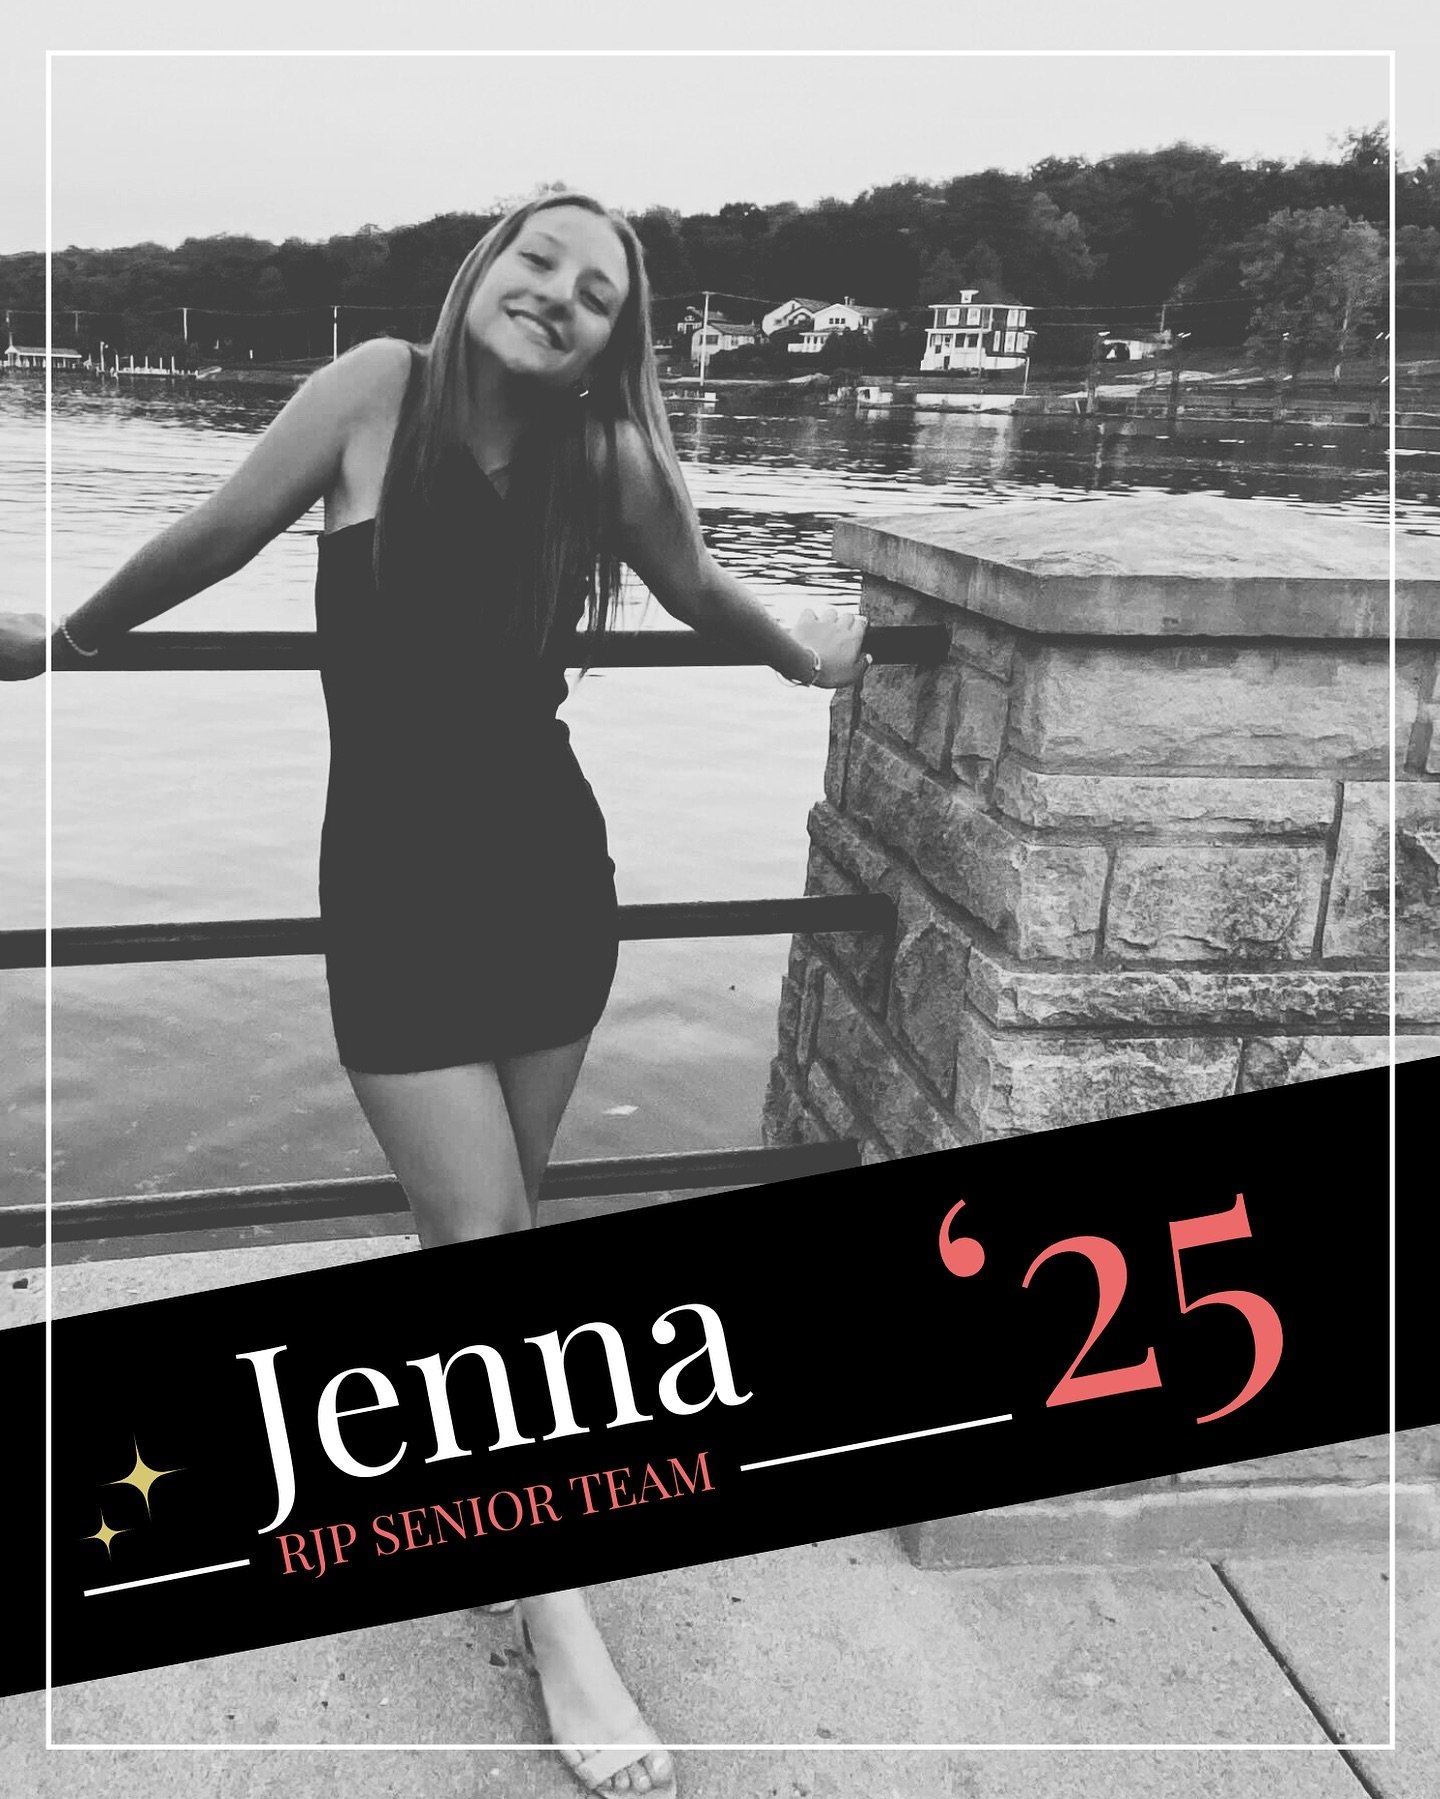 2025 SENIOR TEAM Announcement // Part 4🎉
Jenna❤️

So excited to be kicking off our new senior team photoshoot in just a few short weeks. We&rsquo;ve been waiting for the spring 🌸🌼 to bloom and with all the rain we&rsquo;ve had they are just about 